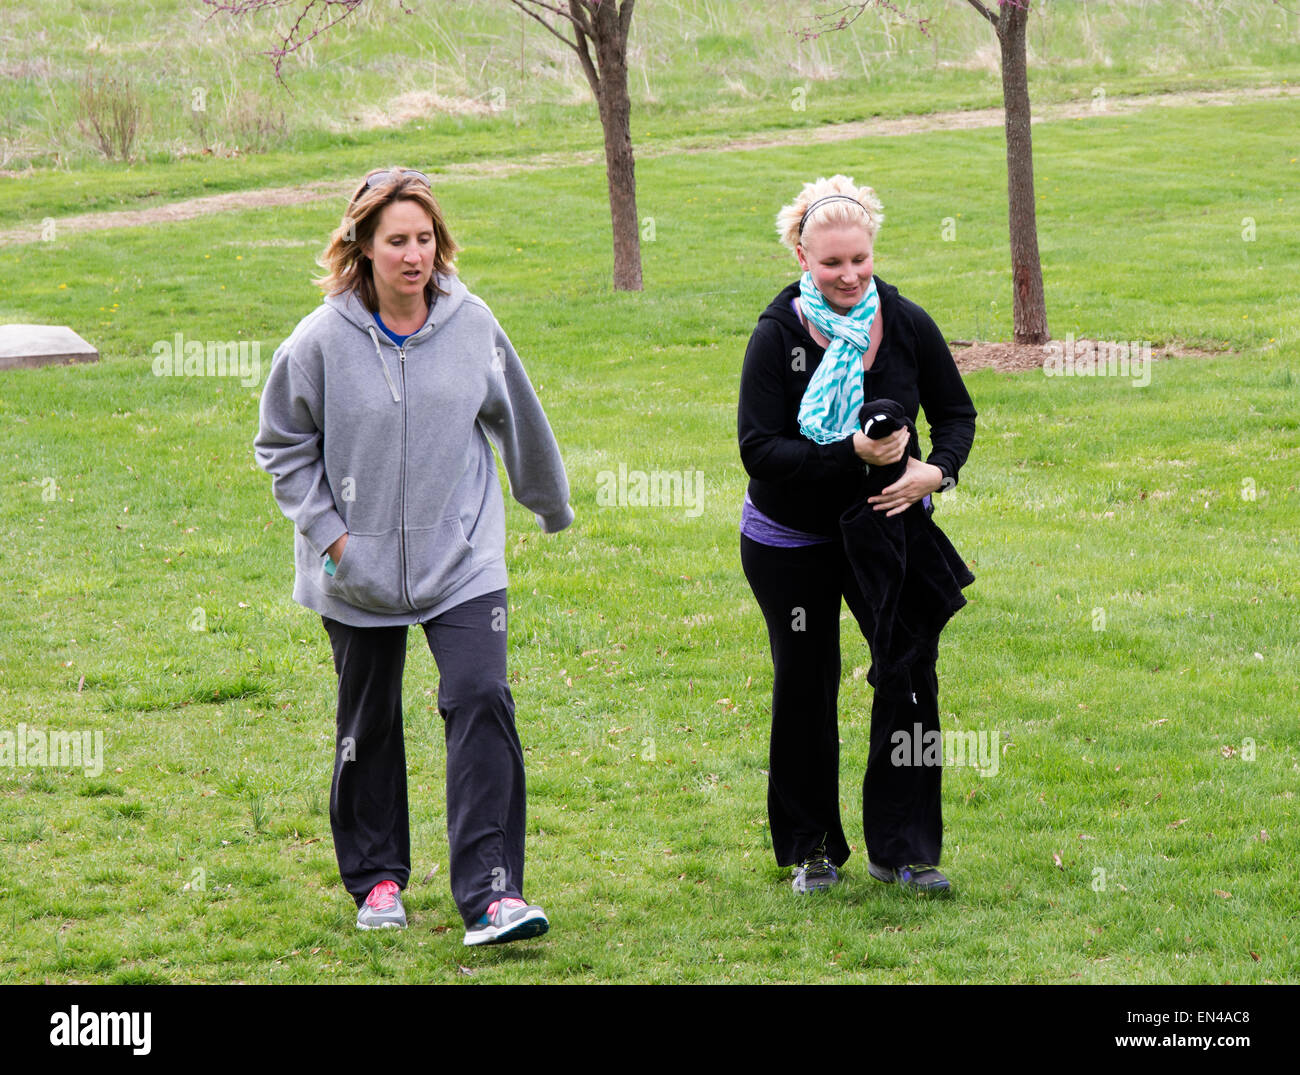 Two women walking and talking in the park. Stock Photo